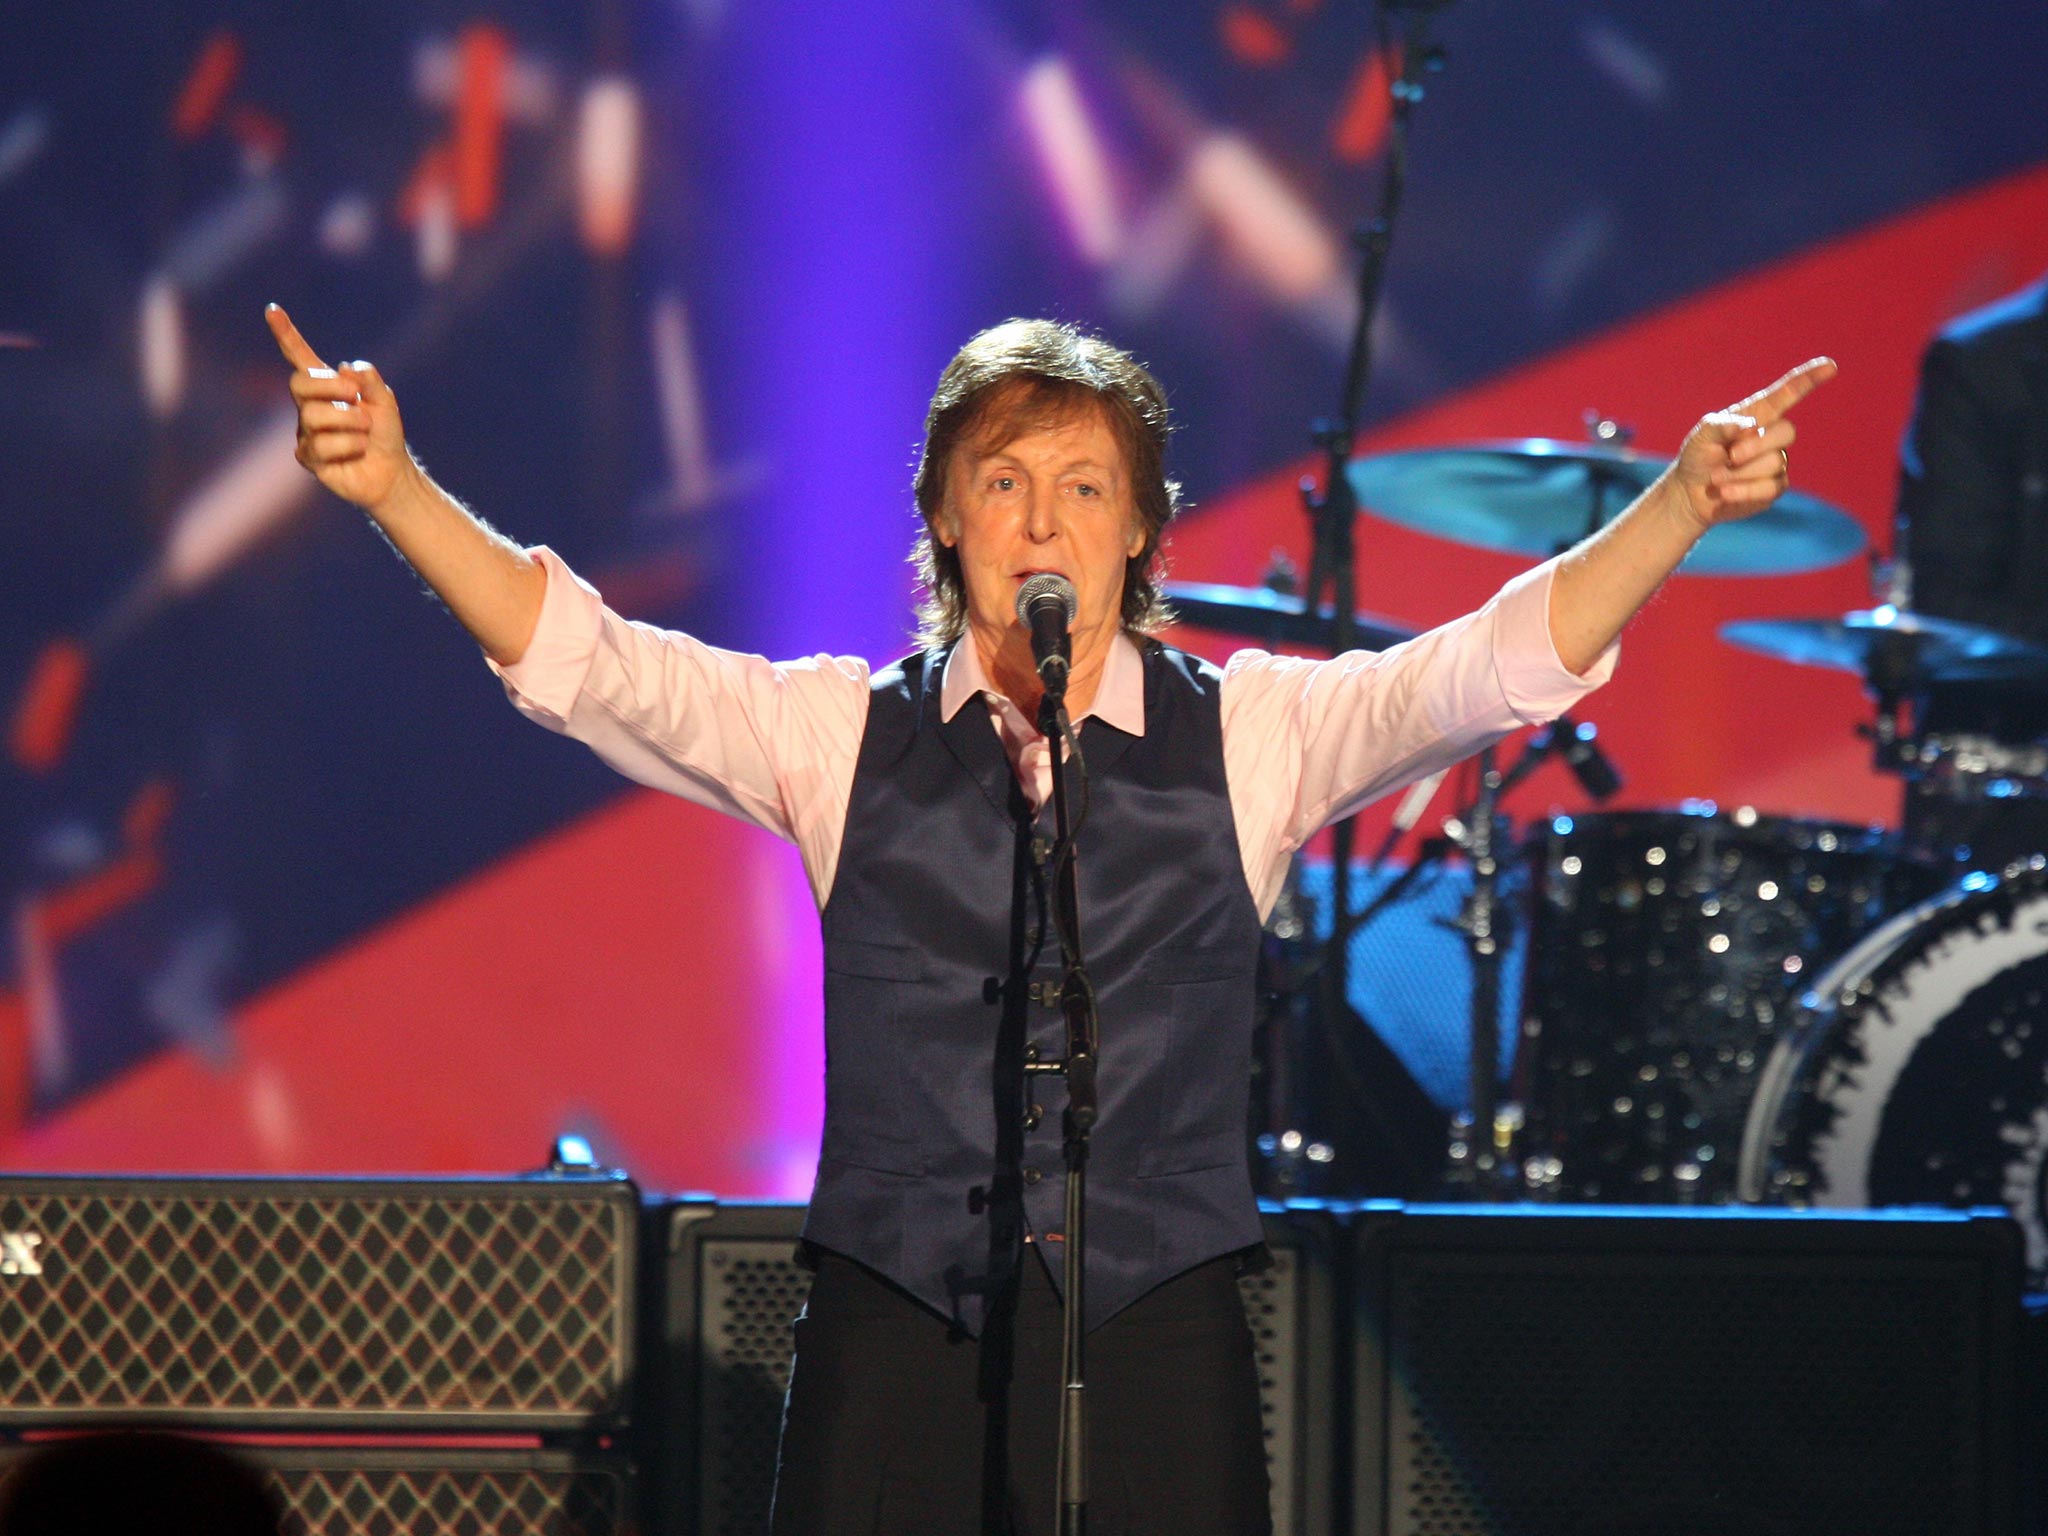 McCartney's Out There Tour was expected to see him perform 58 shows and earn him a cool $105.8 million in ticket sales